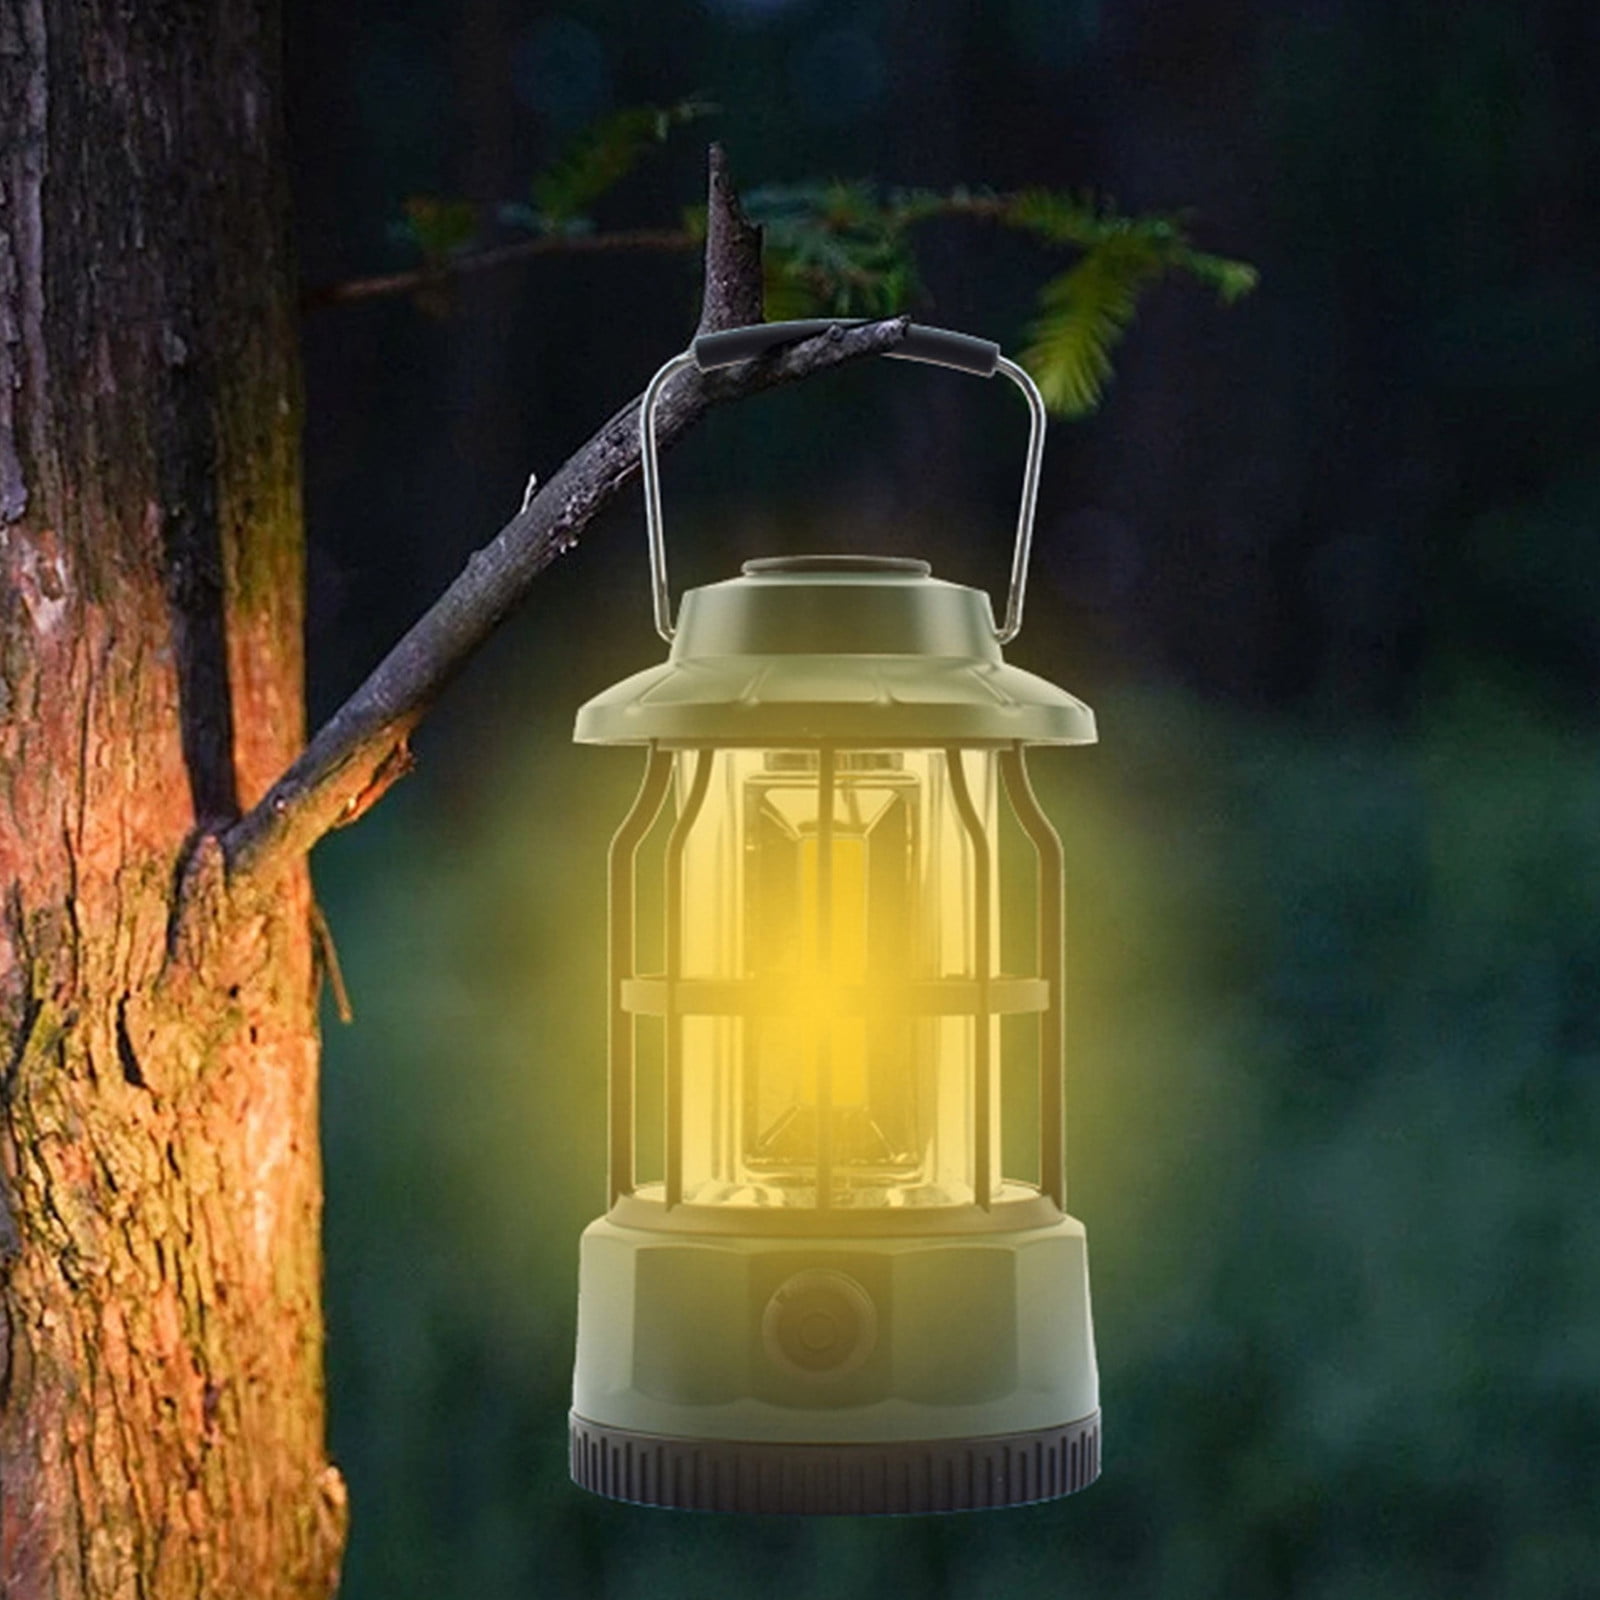 SDJMa LED Camping Lantern, USB Rechargeable Camping Lamp, Camping Light  with Magnetic Base 3 Modes Waterproof Portable Outdoor Tent Light for  Hiking